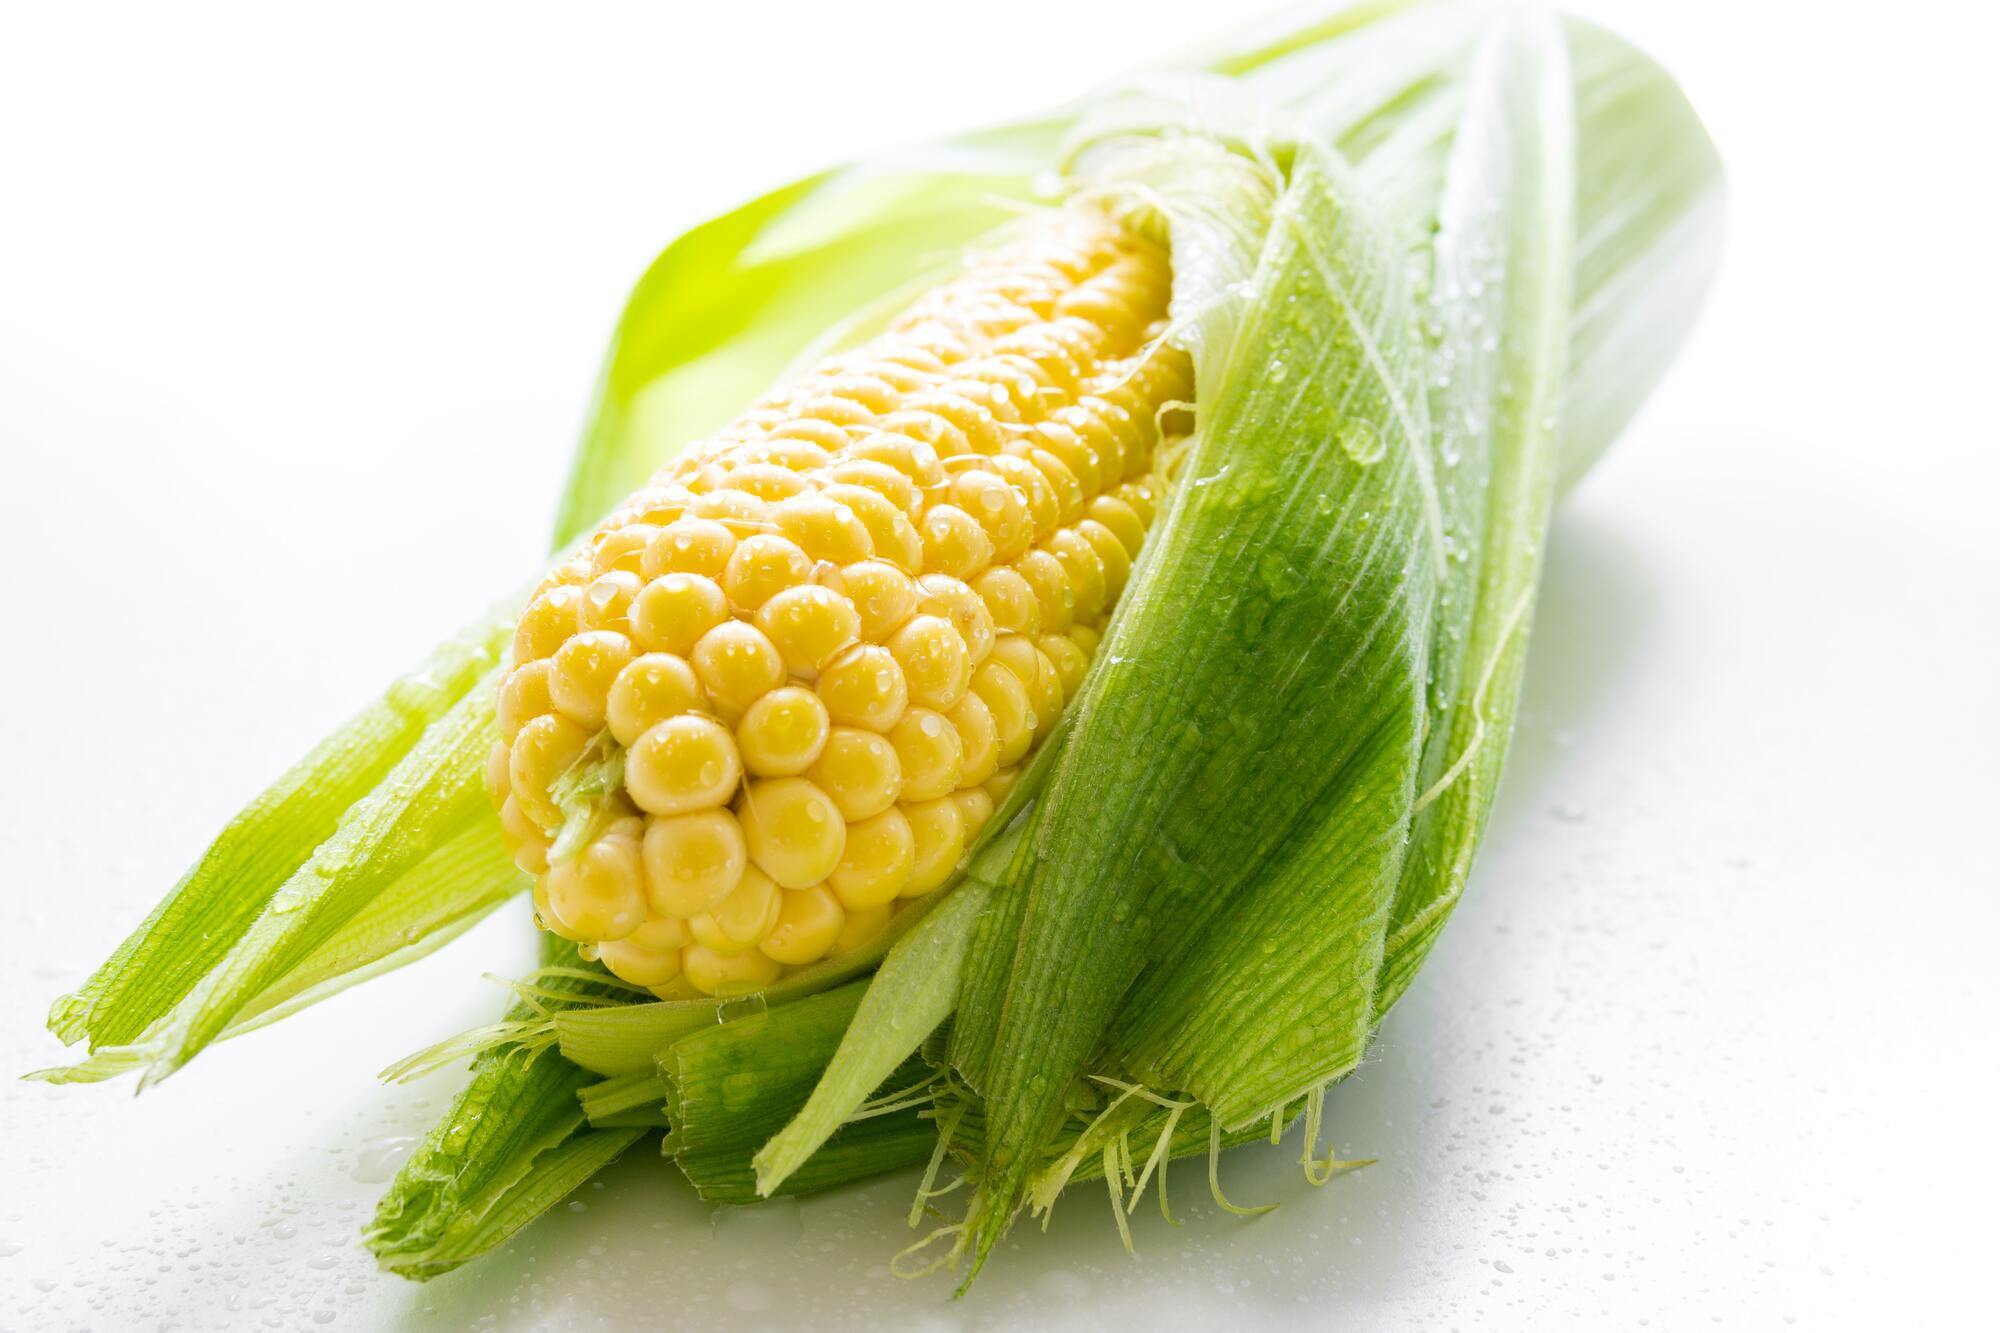 The expert tells how long to cook corn and why it is useful